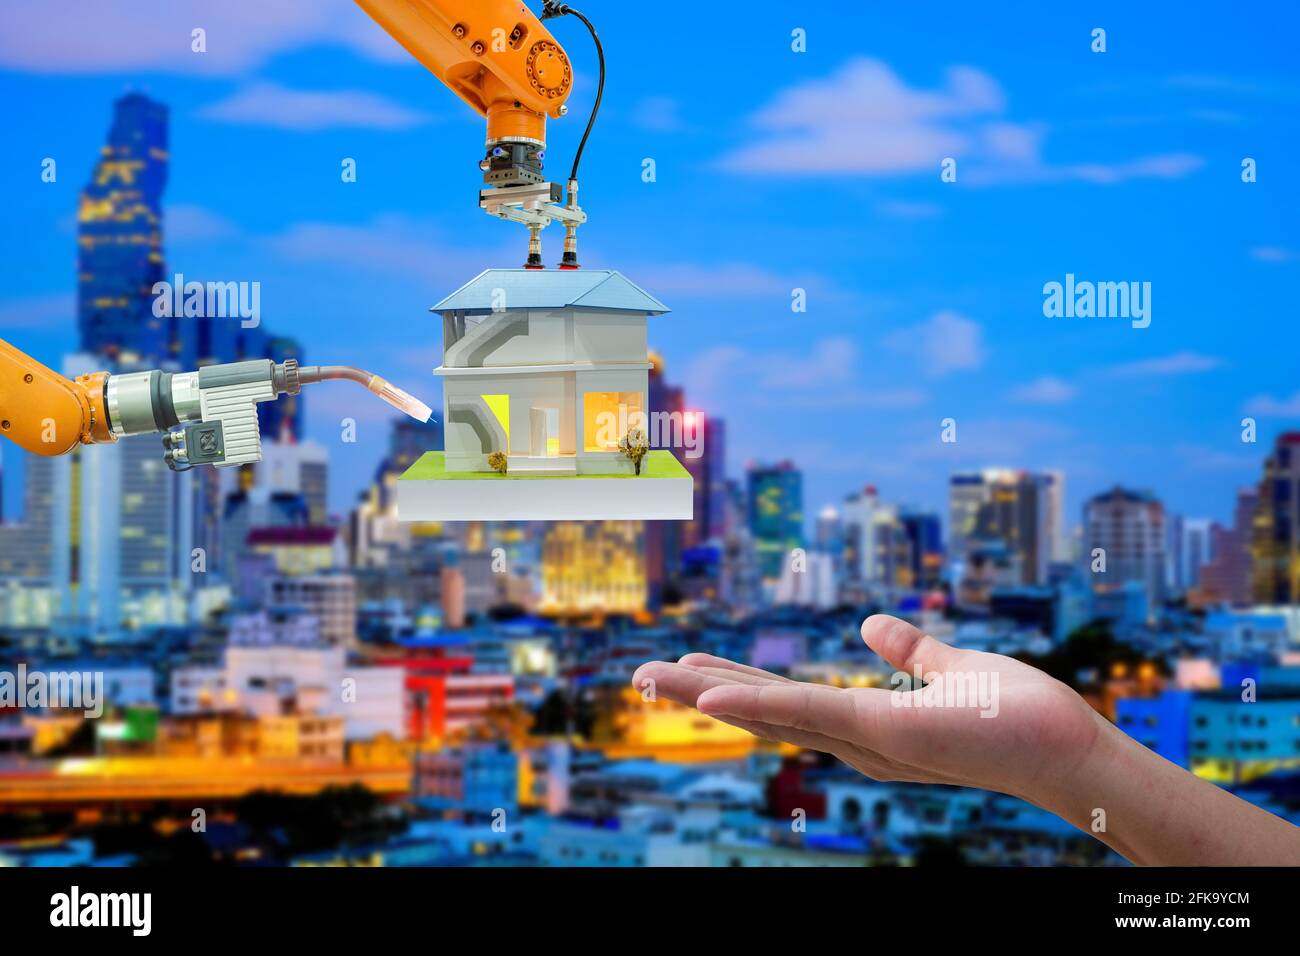 Close-up industrial robotics working with home mockup for send to hand human on blurred cityscape blue tone color background, industry 4.0 concept Stock Photo